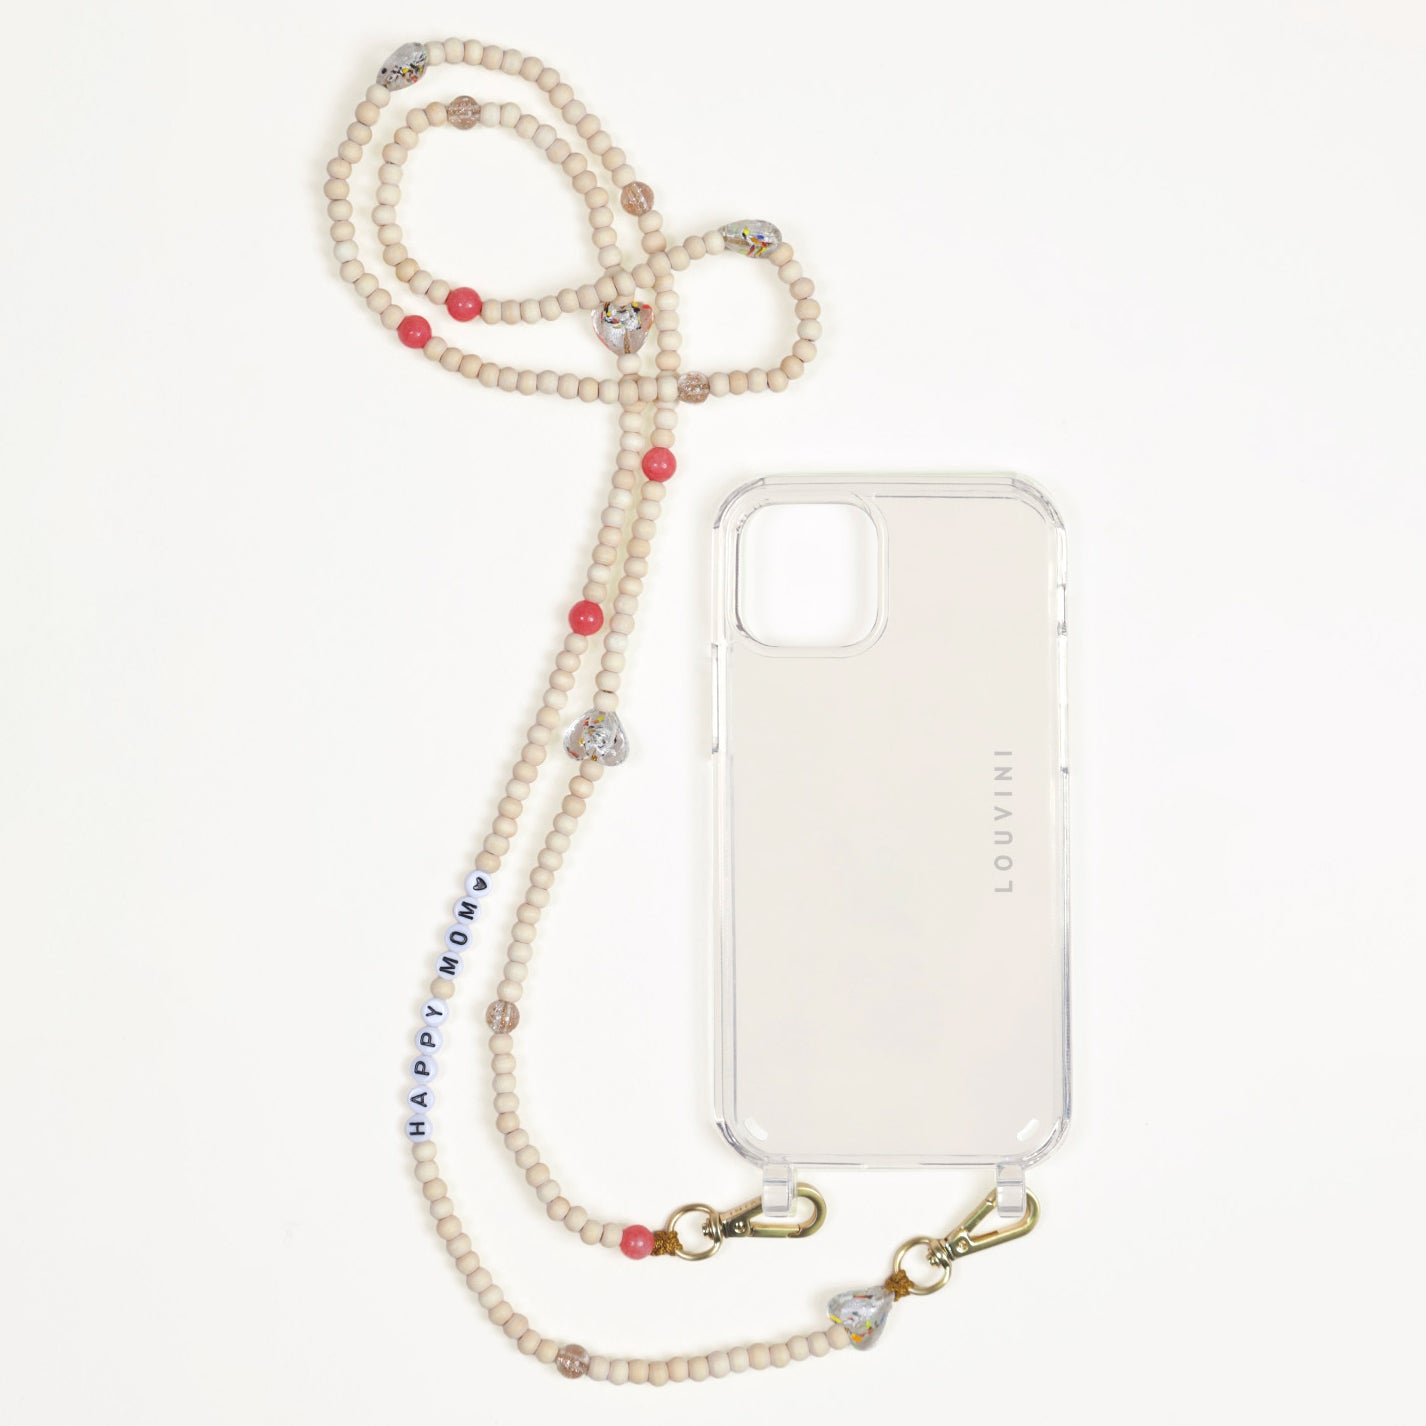 Charlie iPhone Case & Arielle "Happy Mom" Strap